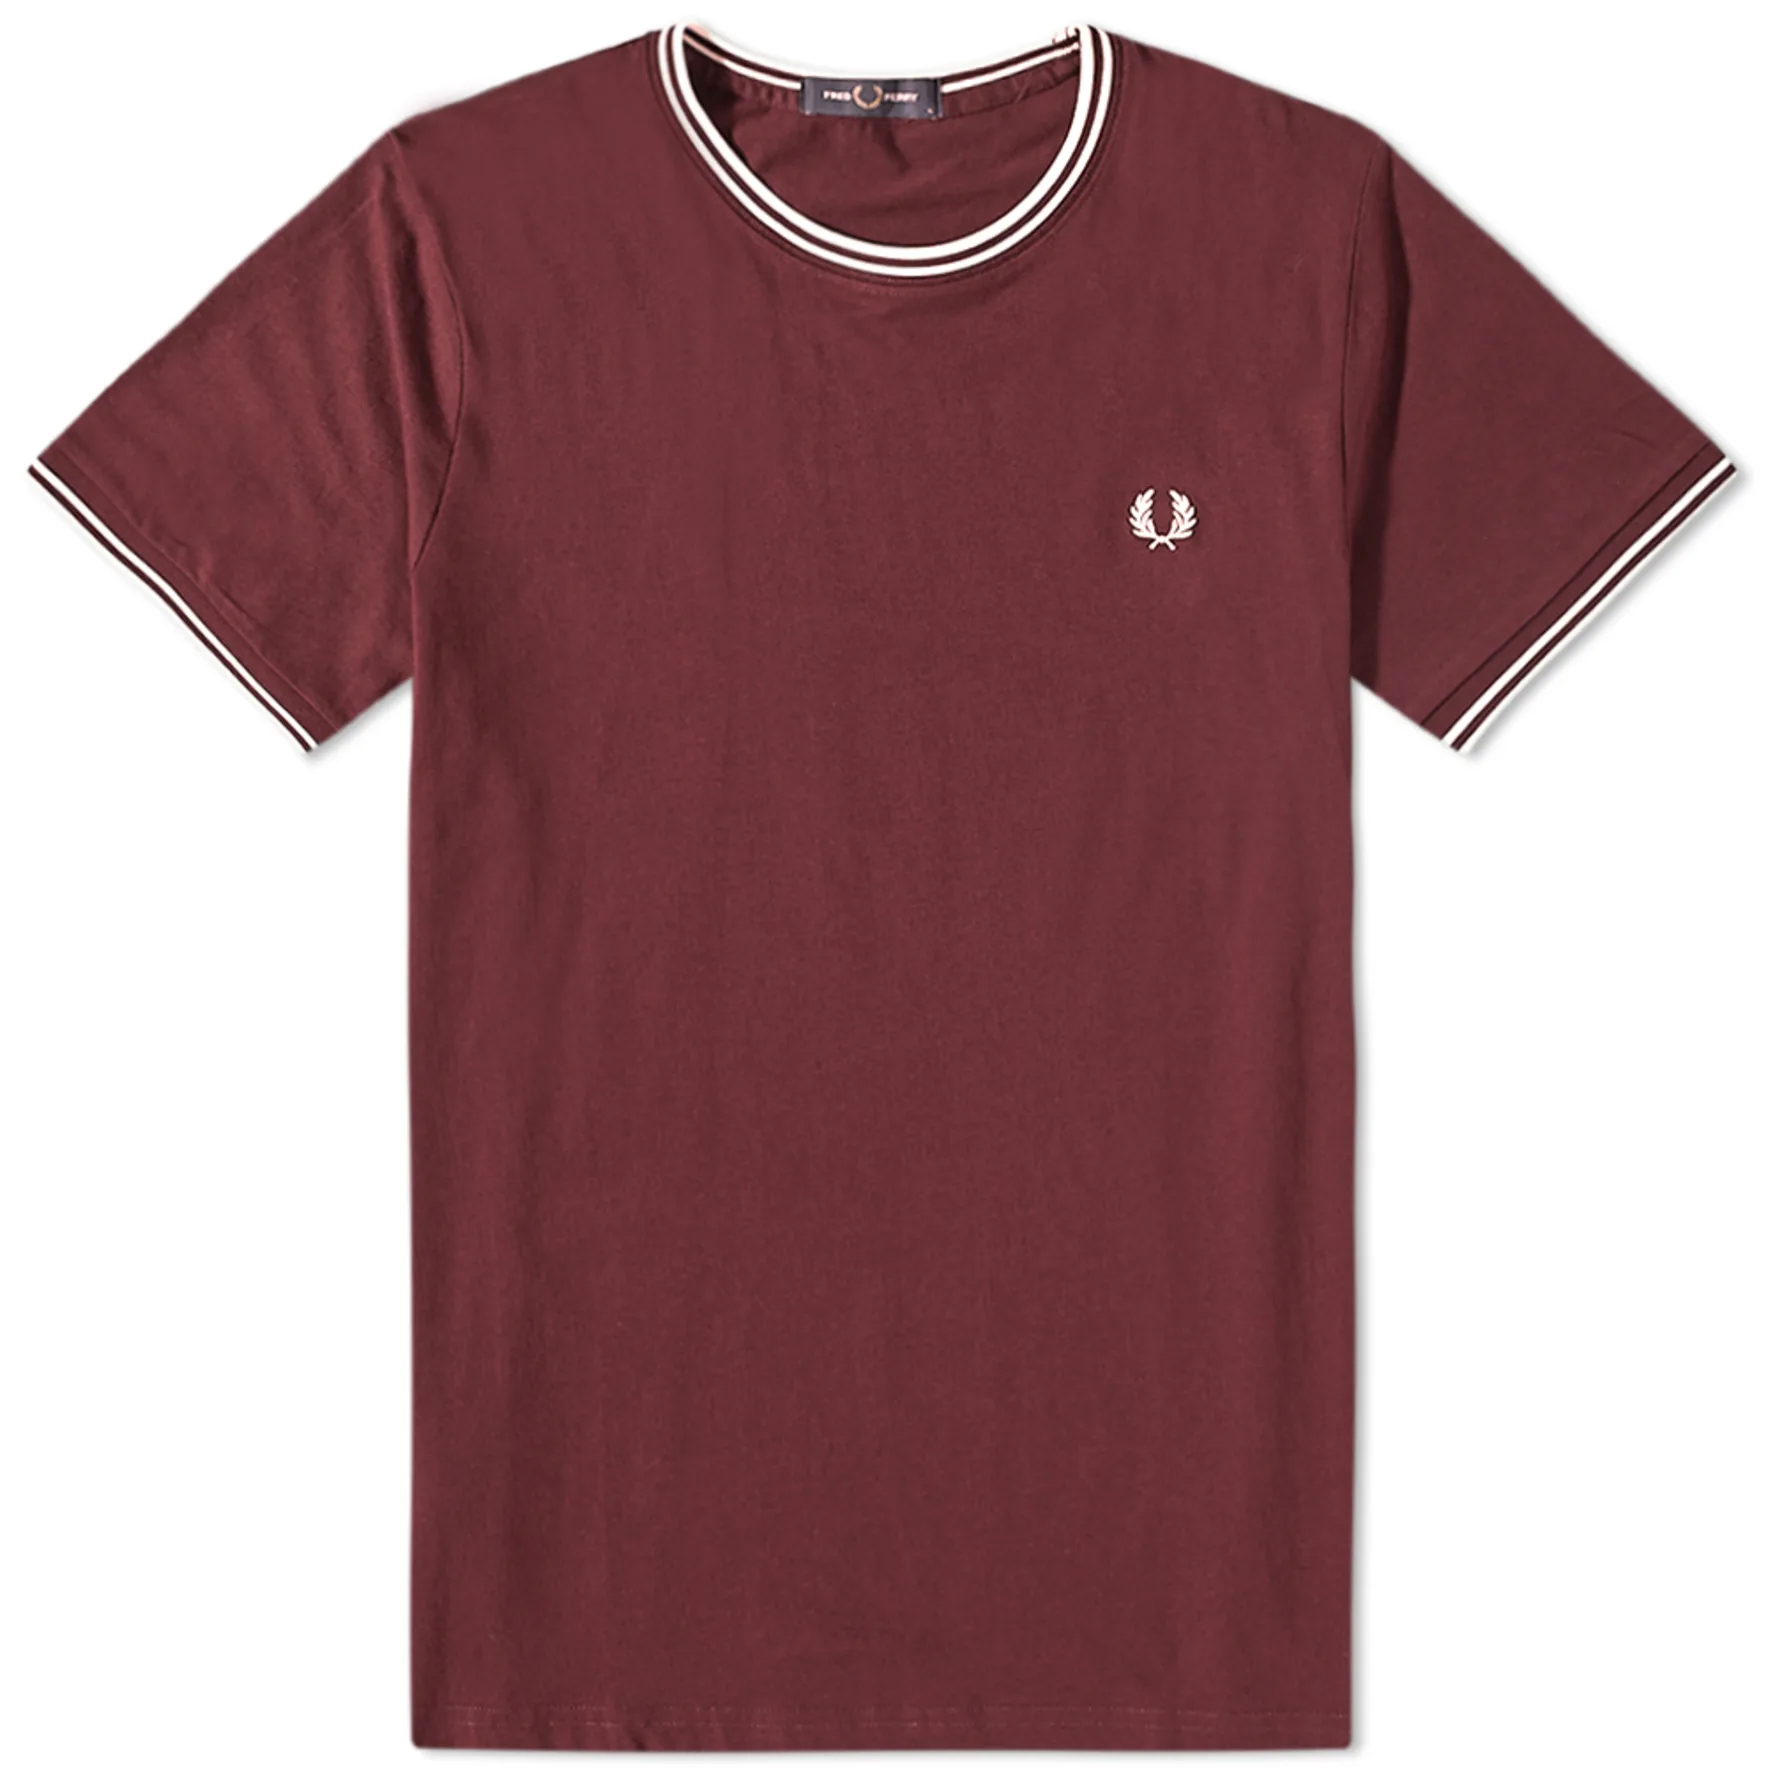 Футболка Fred Perry Authentic Twin Tipped, бордовый футболка поло fred perry twin tipped белый